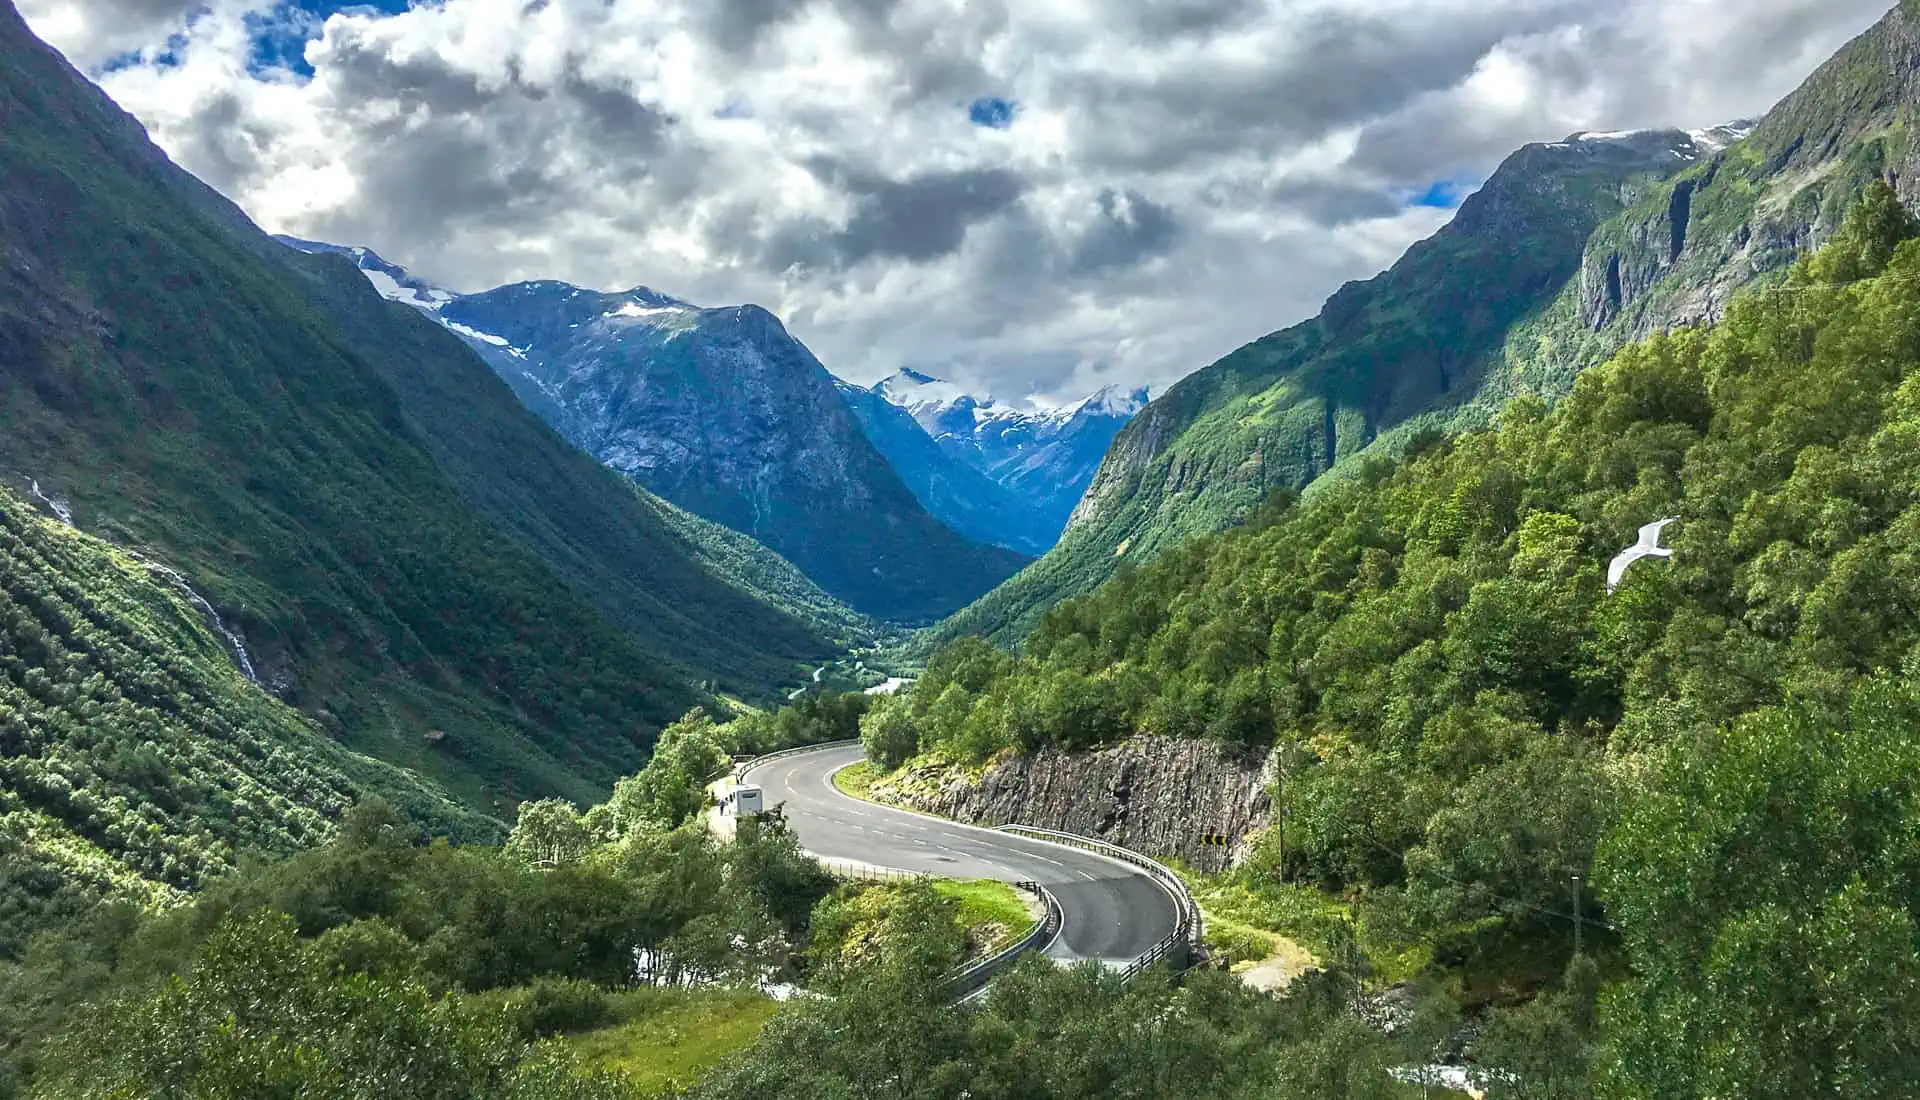 The road winds through lush green mountains on the way to Geiranger on our Norway roadtrip.